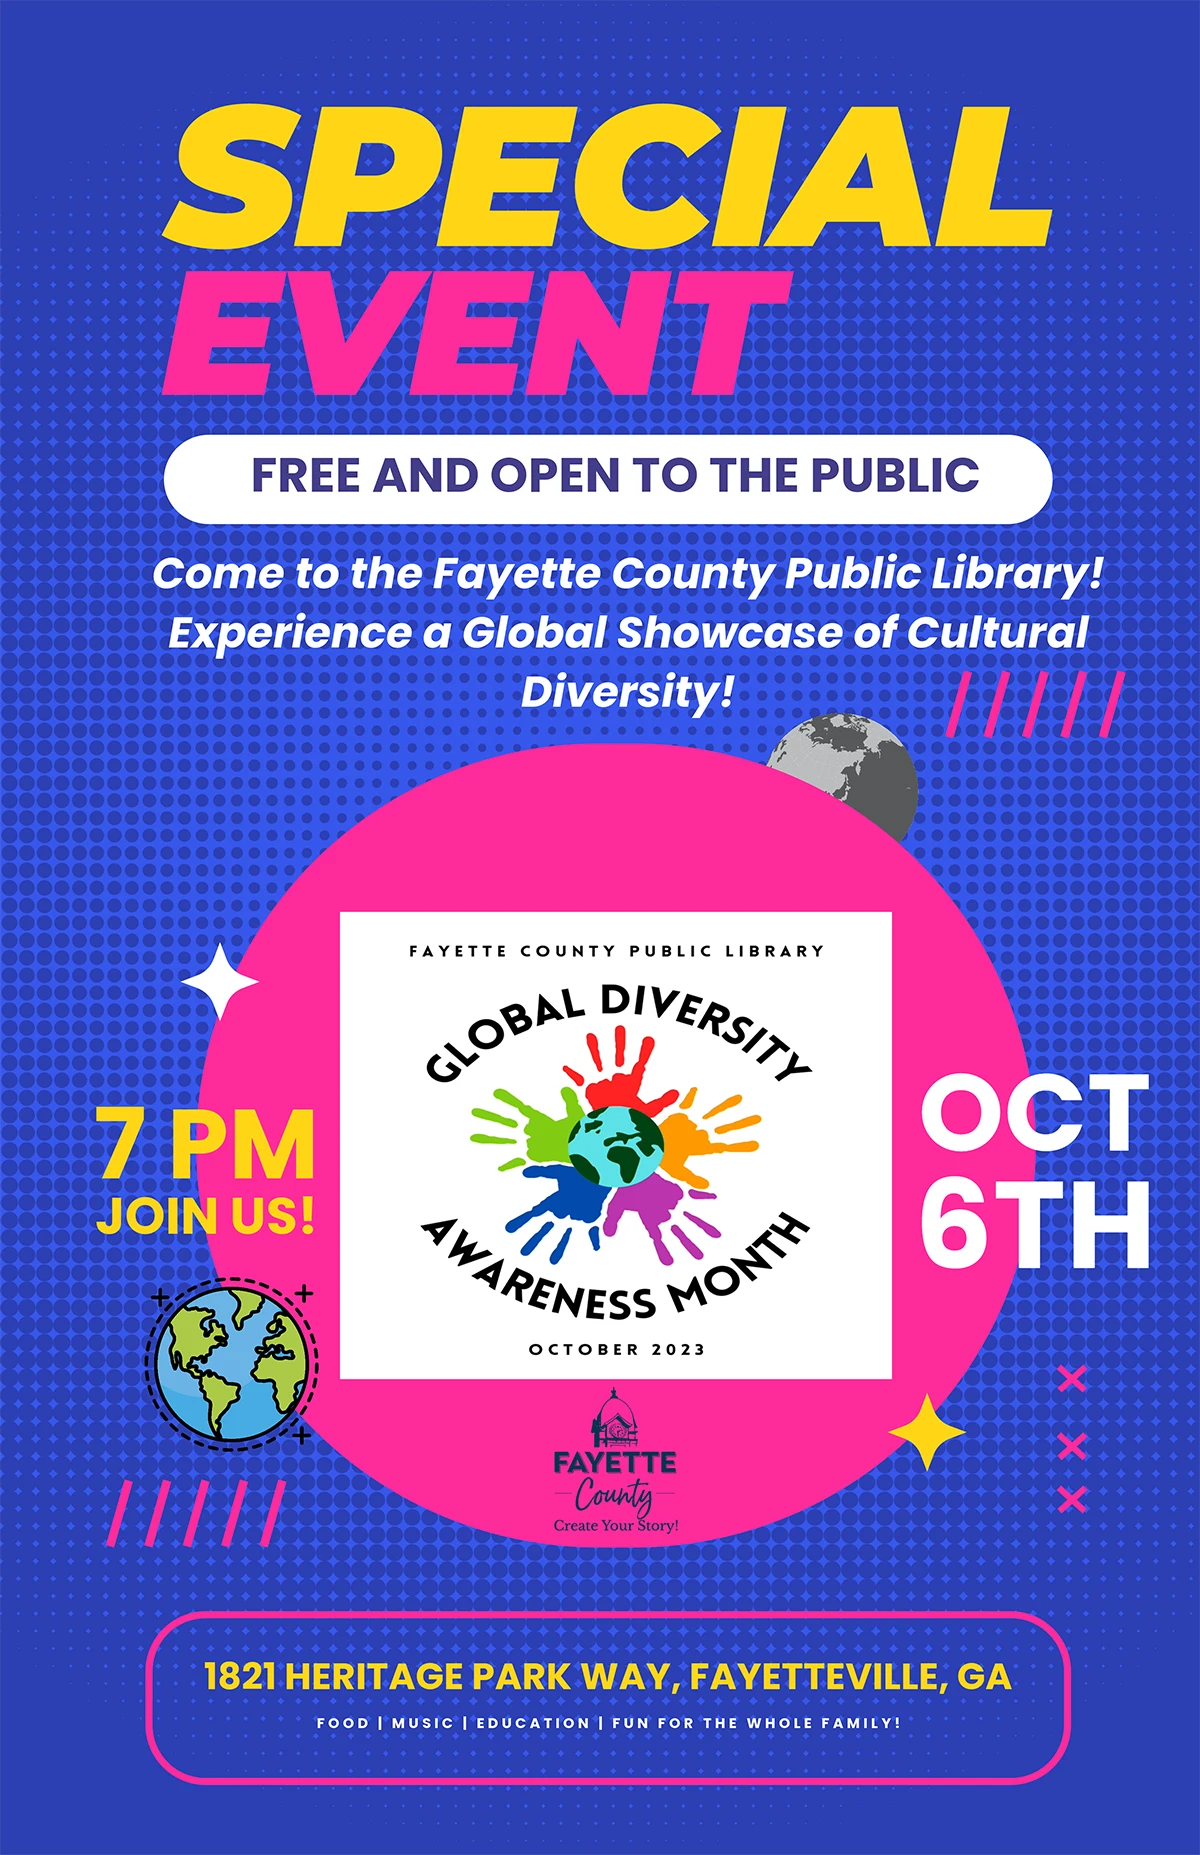 Come to the Fayette County Public Library! Experience a Global Showcase of Cultural Diversity!